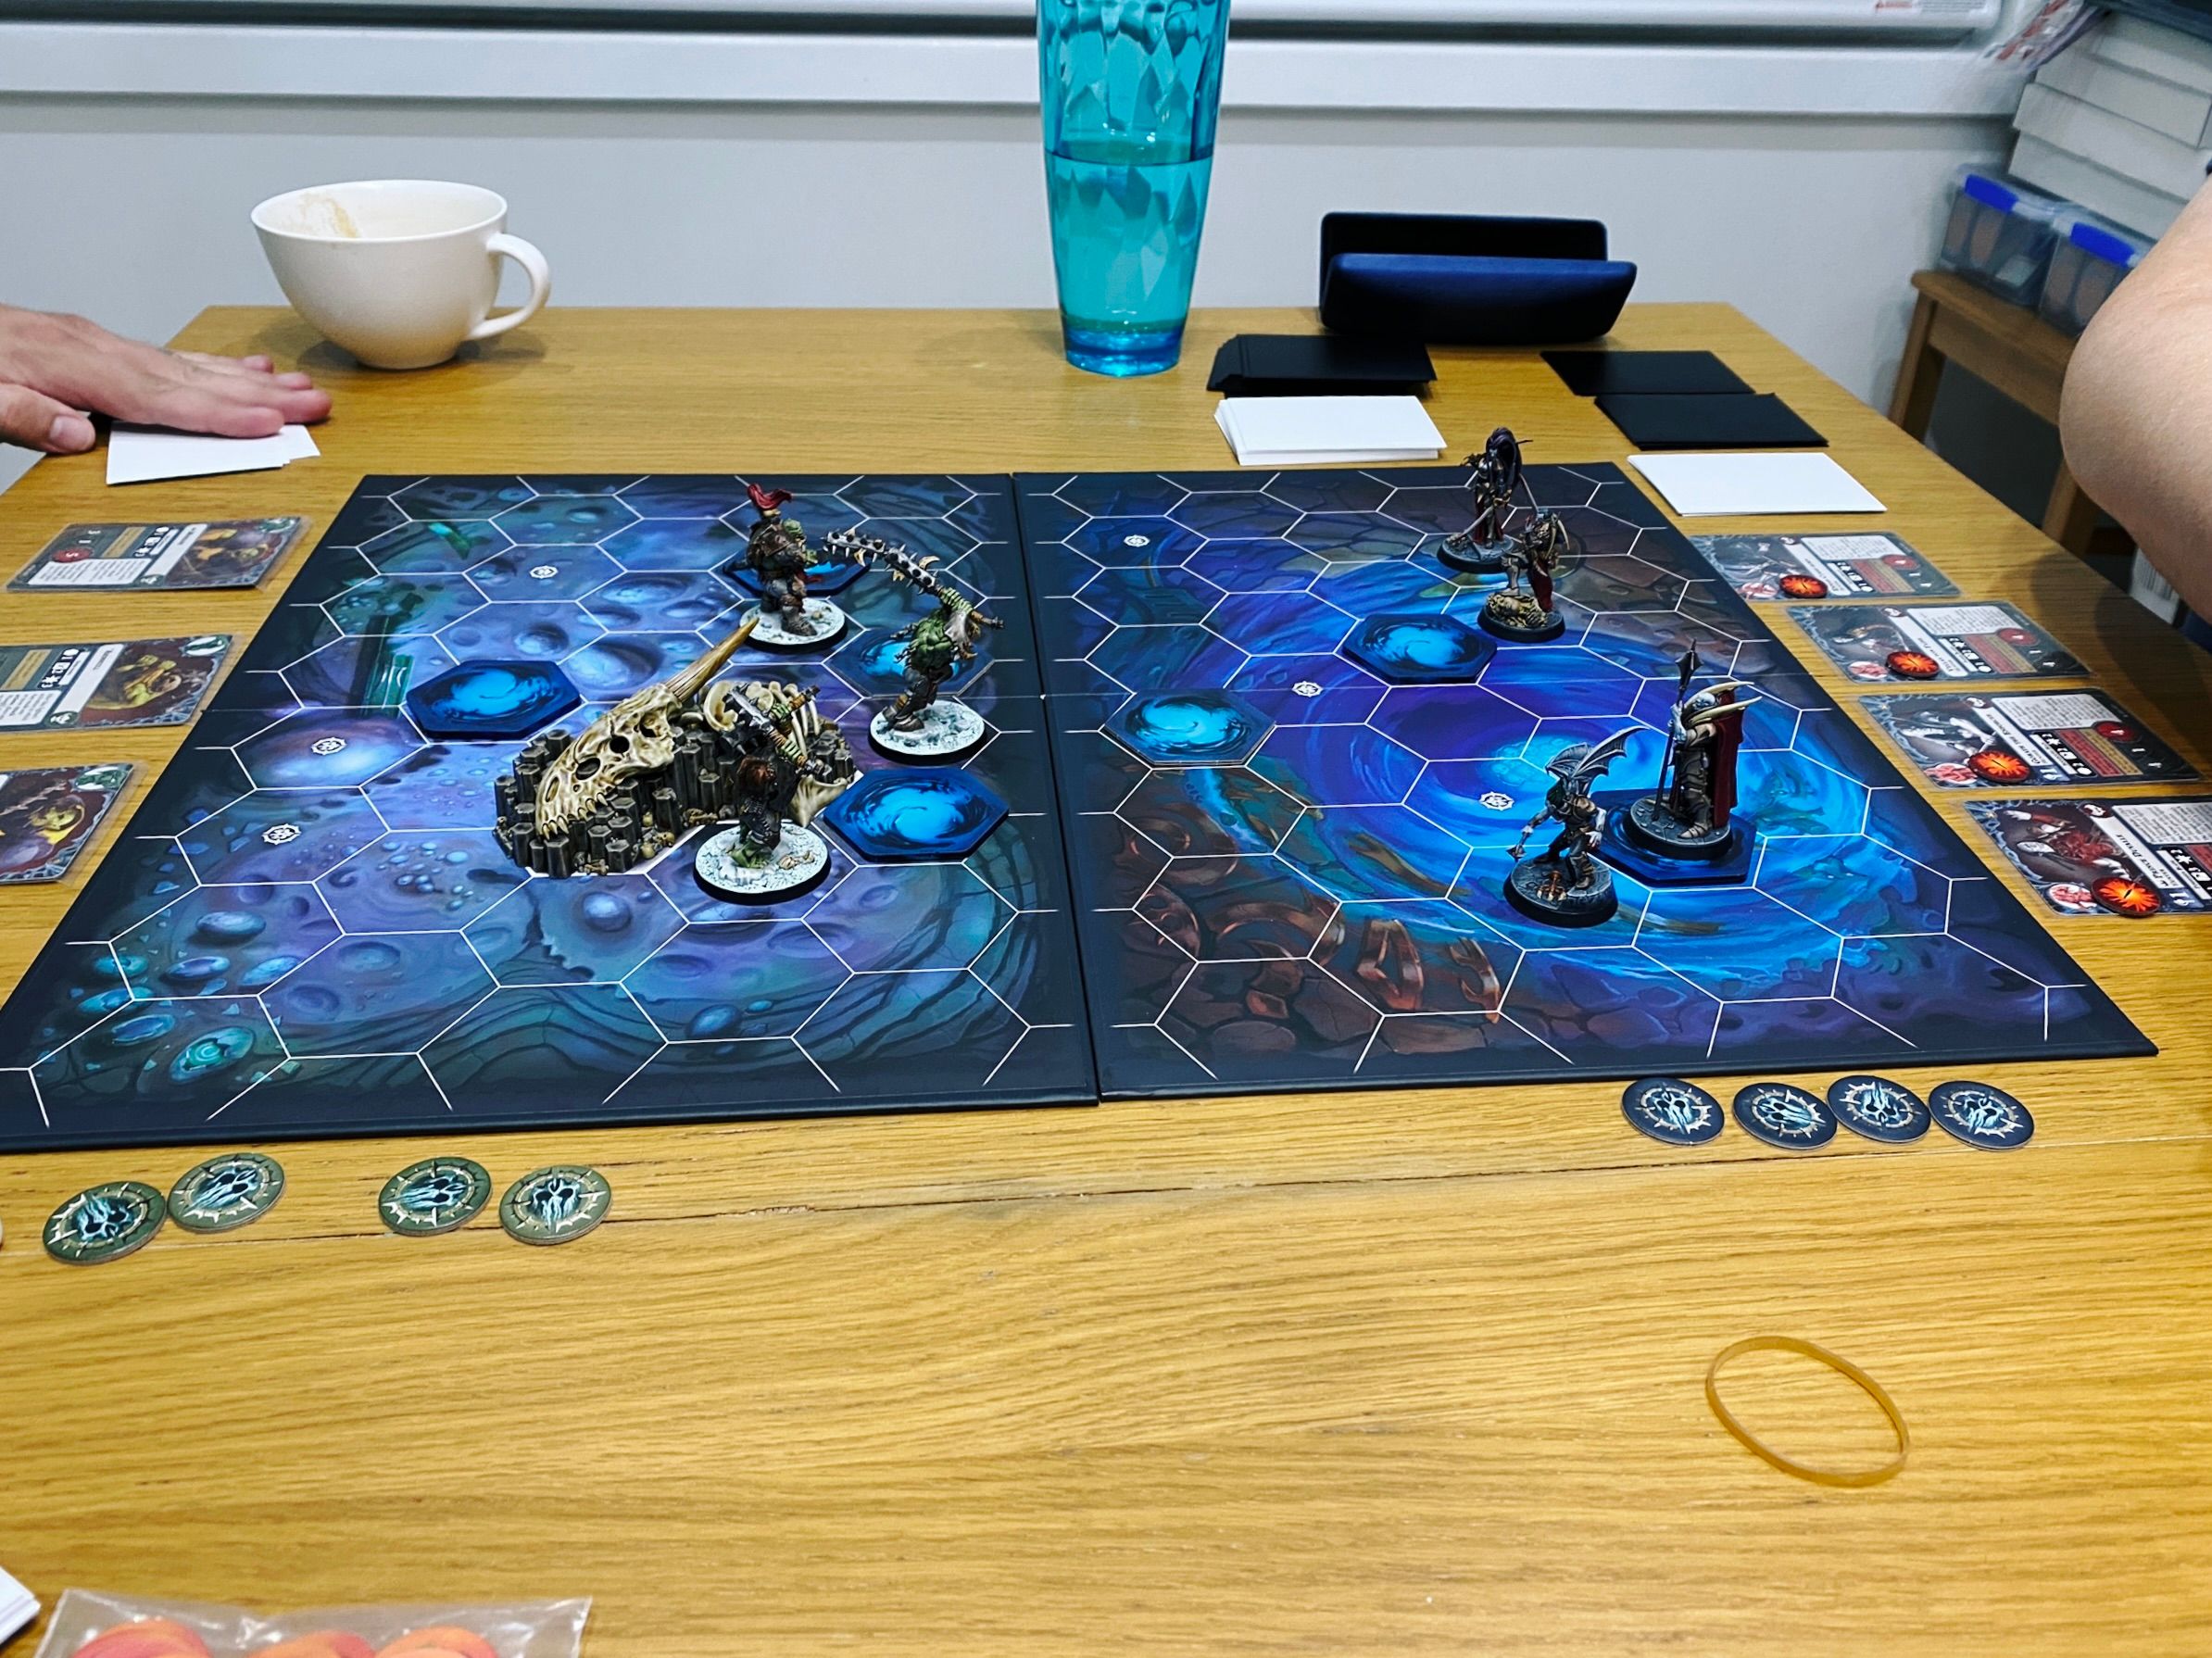 A photo taken side-on of a Warhammer Underworlds game board with three armoured orks on the left very aggressively positioned towards the middle of the board, and four elegant vampires on the right.